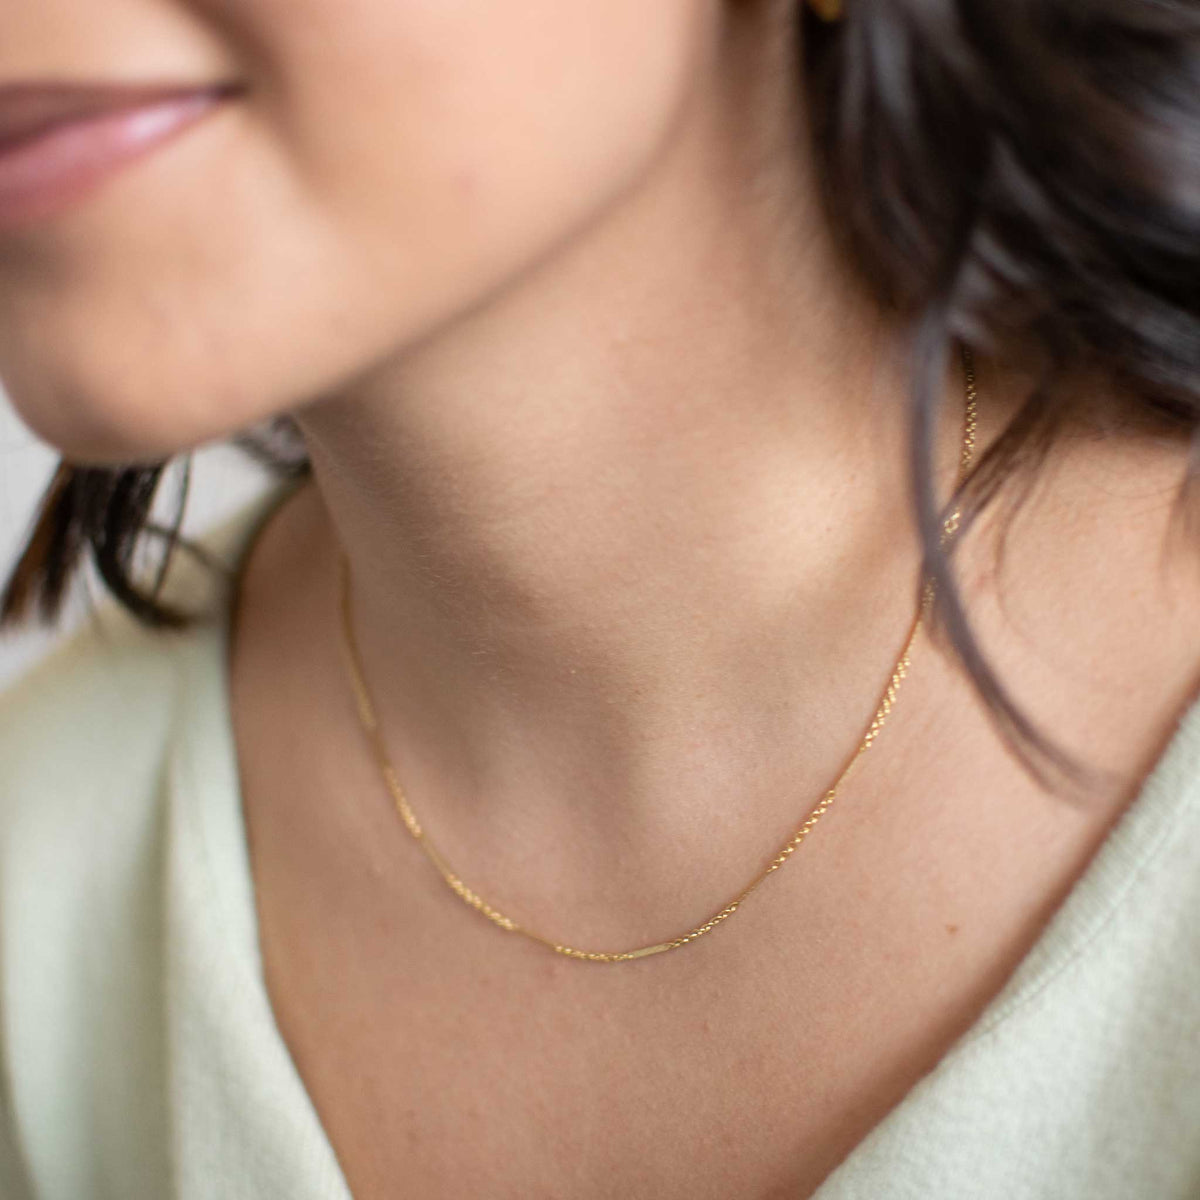 The gold necklace worn by a woman from a slight right angle.